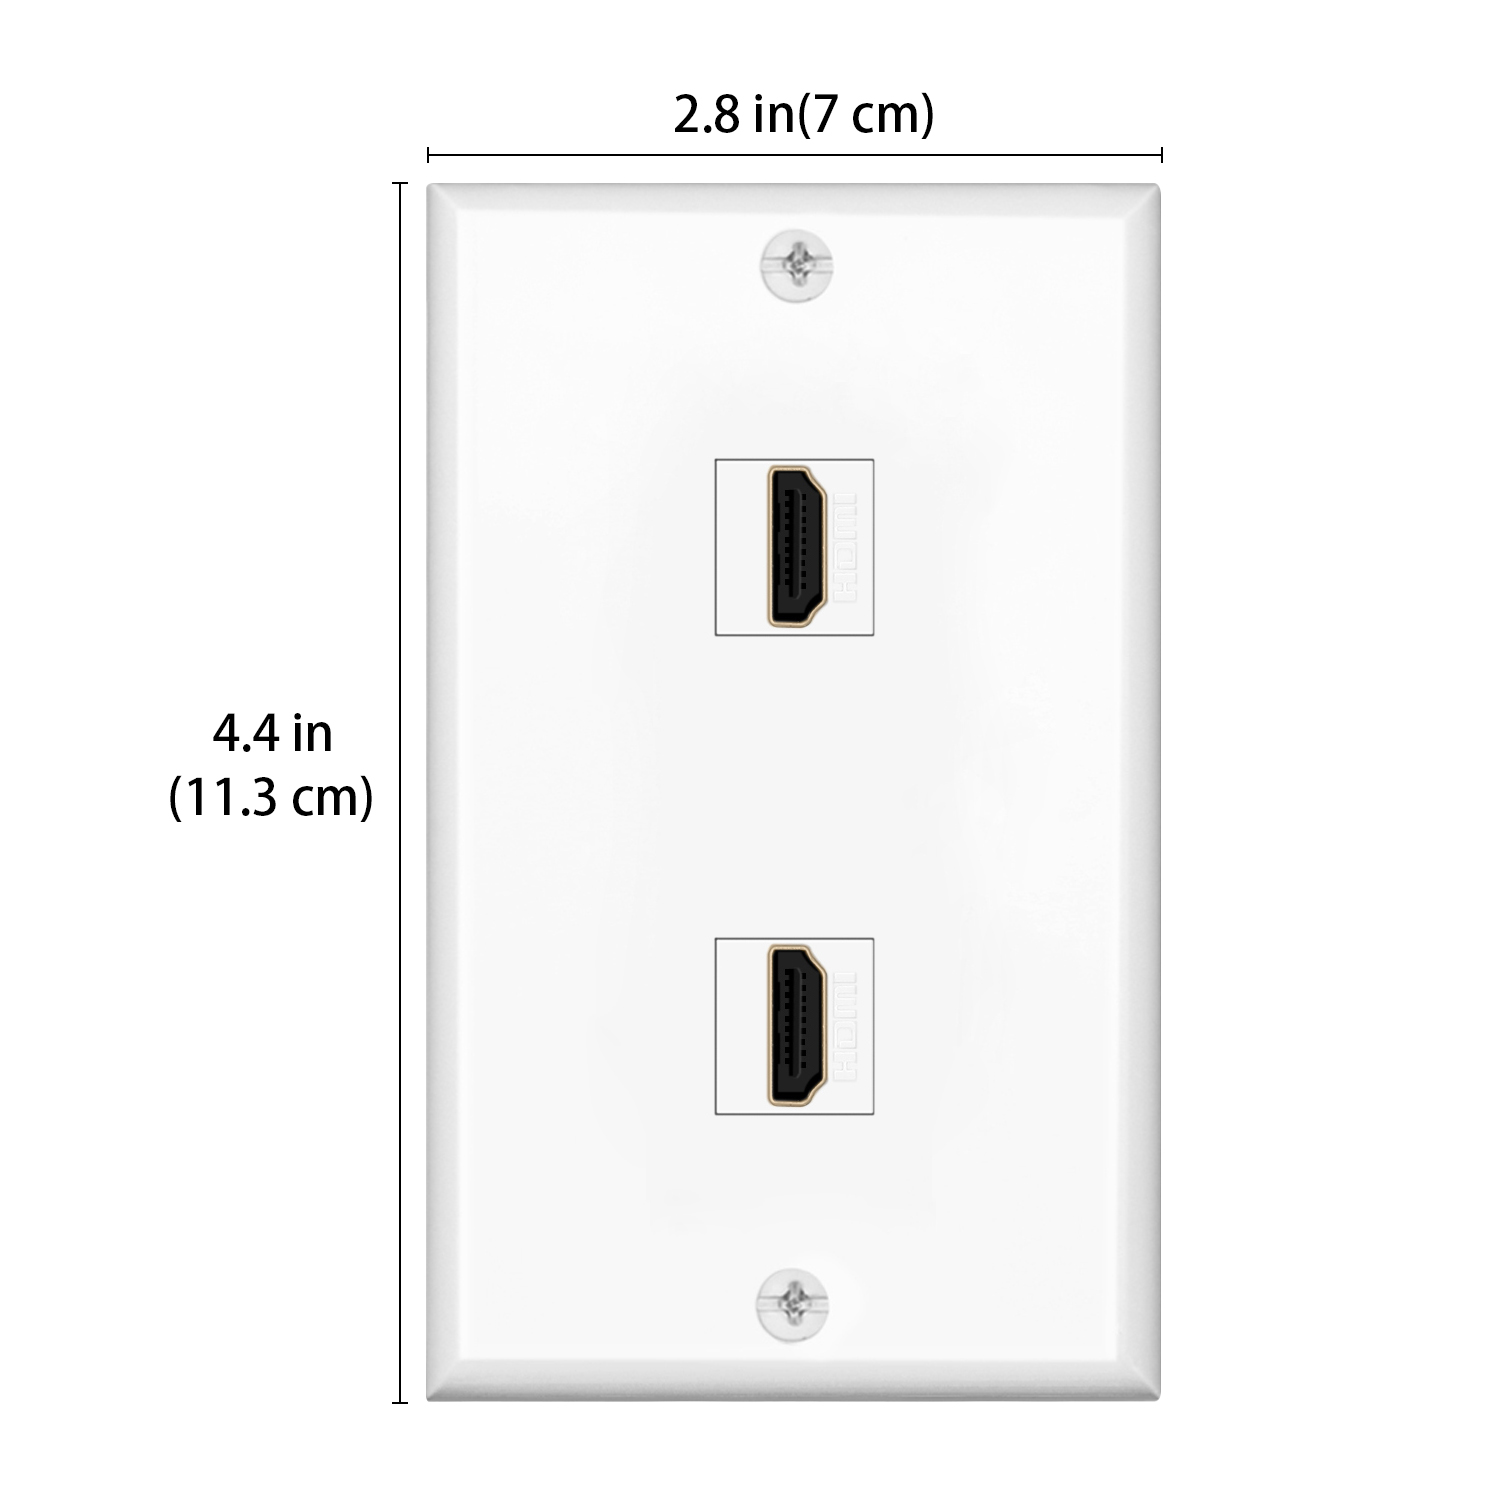 No Soldering - Coupler style connectors provide simple and easy connections to front & back of wall plate